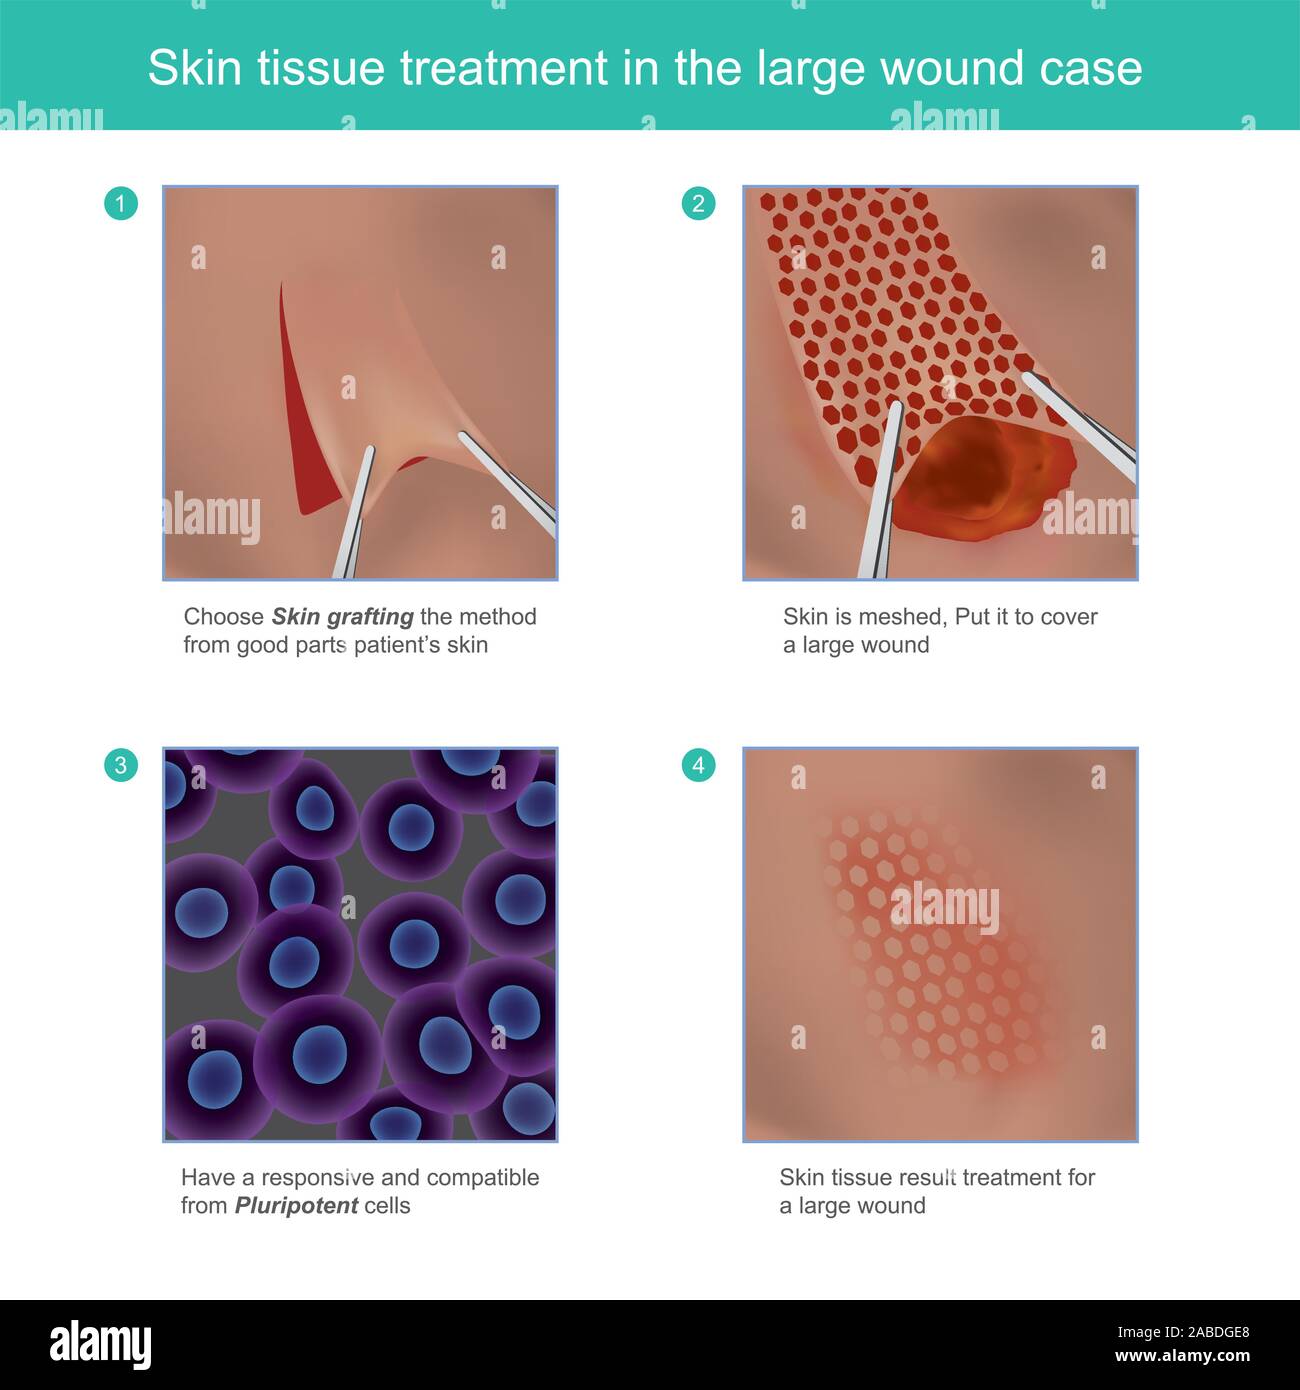 Skin tissue treatment in the large wound. Example illustration explain skin grafting tissue method treatment for large wound. Stock Vector